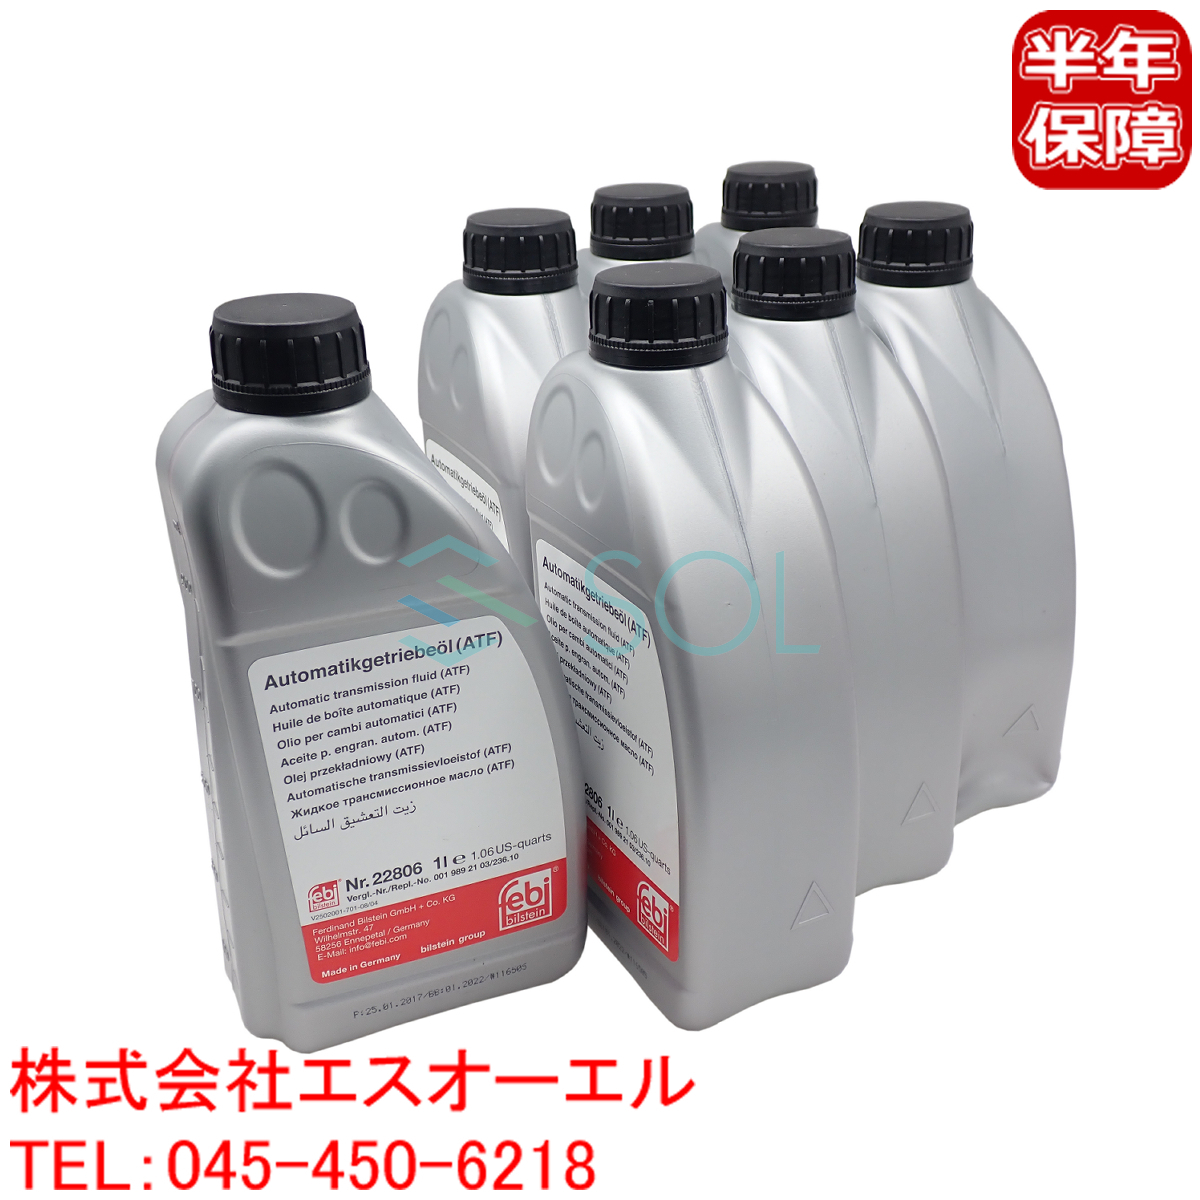  Benz AT oil ATF oil (722.6 722.7 series electronically controlled type 5 speed AT for ) DEX3( ingredient :tekisi long 3) 1L 7 pcs set 001989210310 shipping deadline 18 hour 